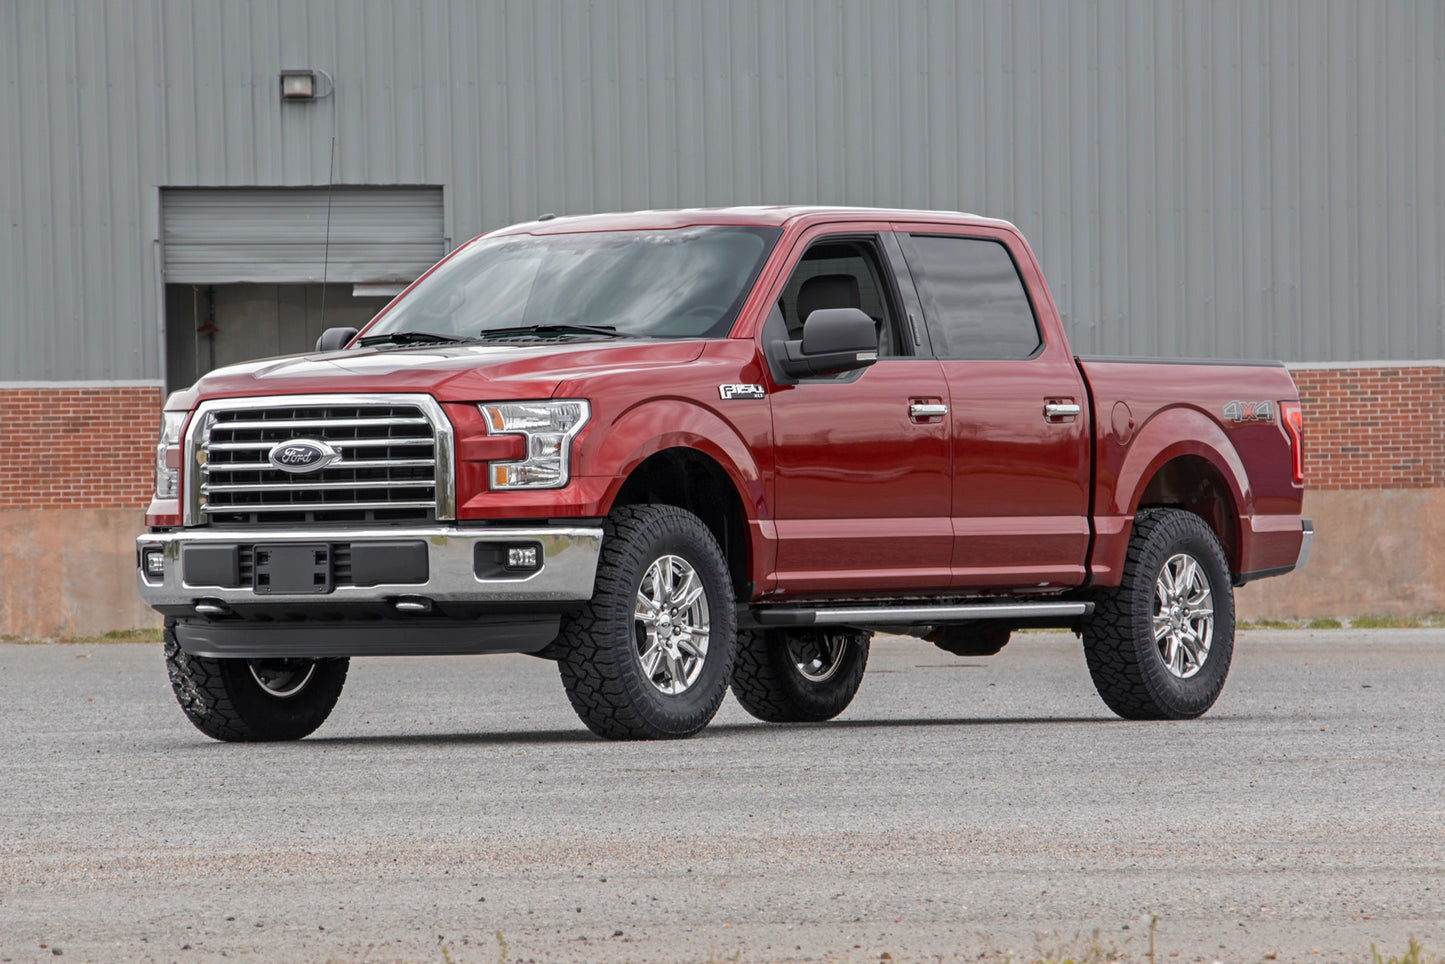 Rough Country (56930) 2 Inch Lift Kit | Alum Spacer | Ford F-150 2WD/4WD (2014-2020)